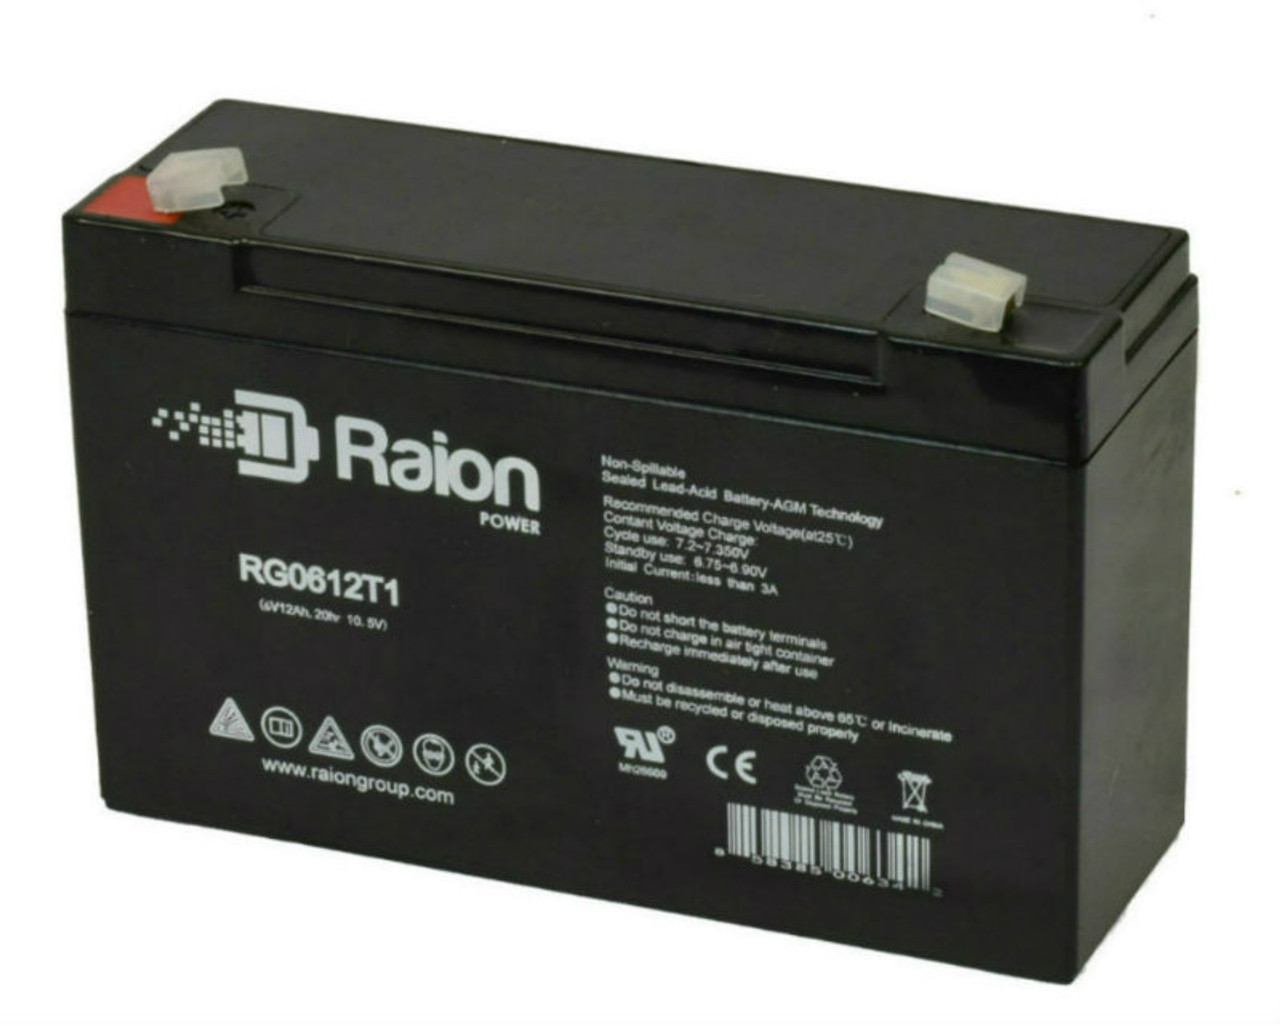 Raion Power RG06120T1 Replacement 6V 12Ah Emergency Light Battery for Chloride 1001137